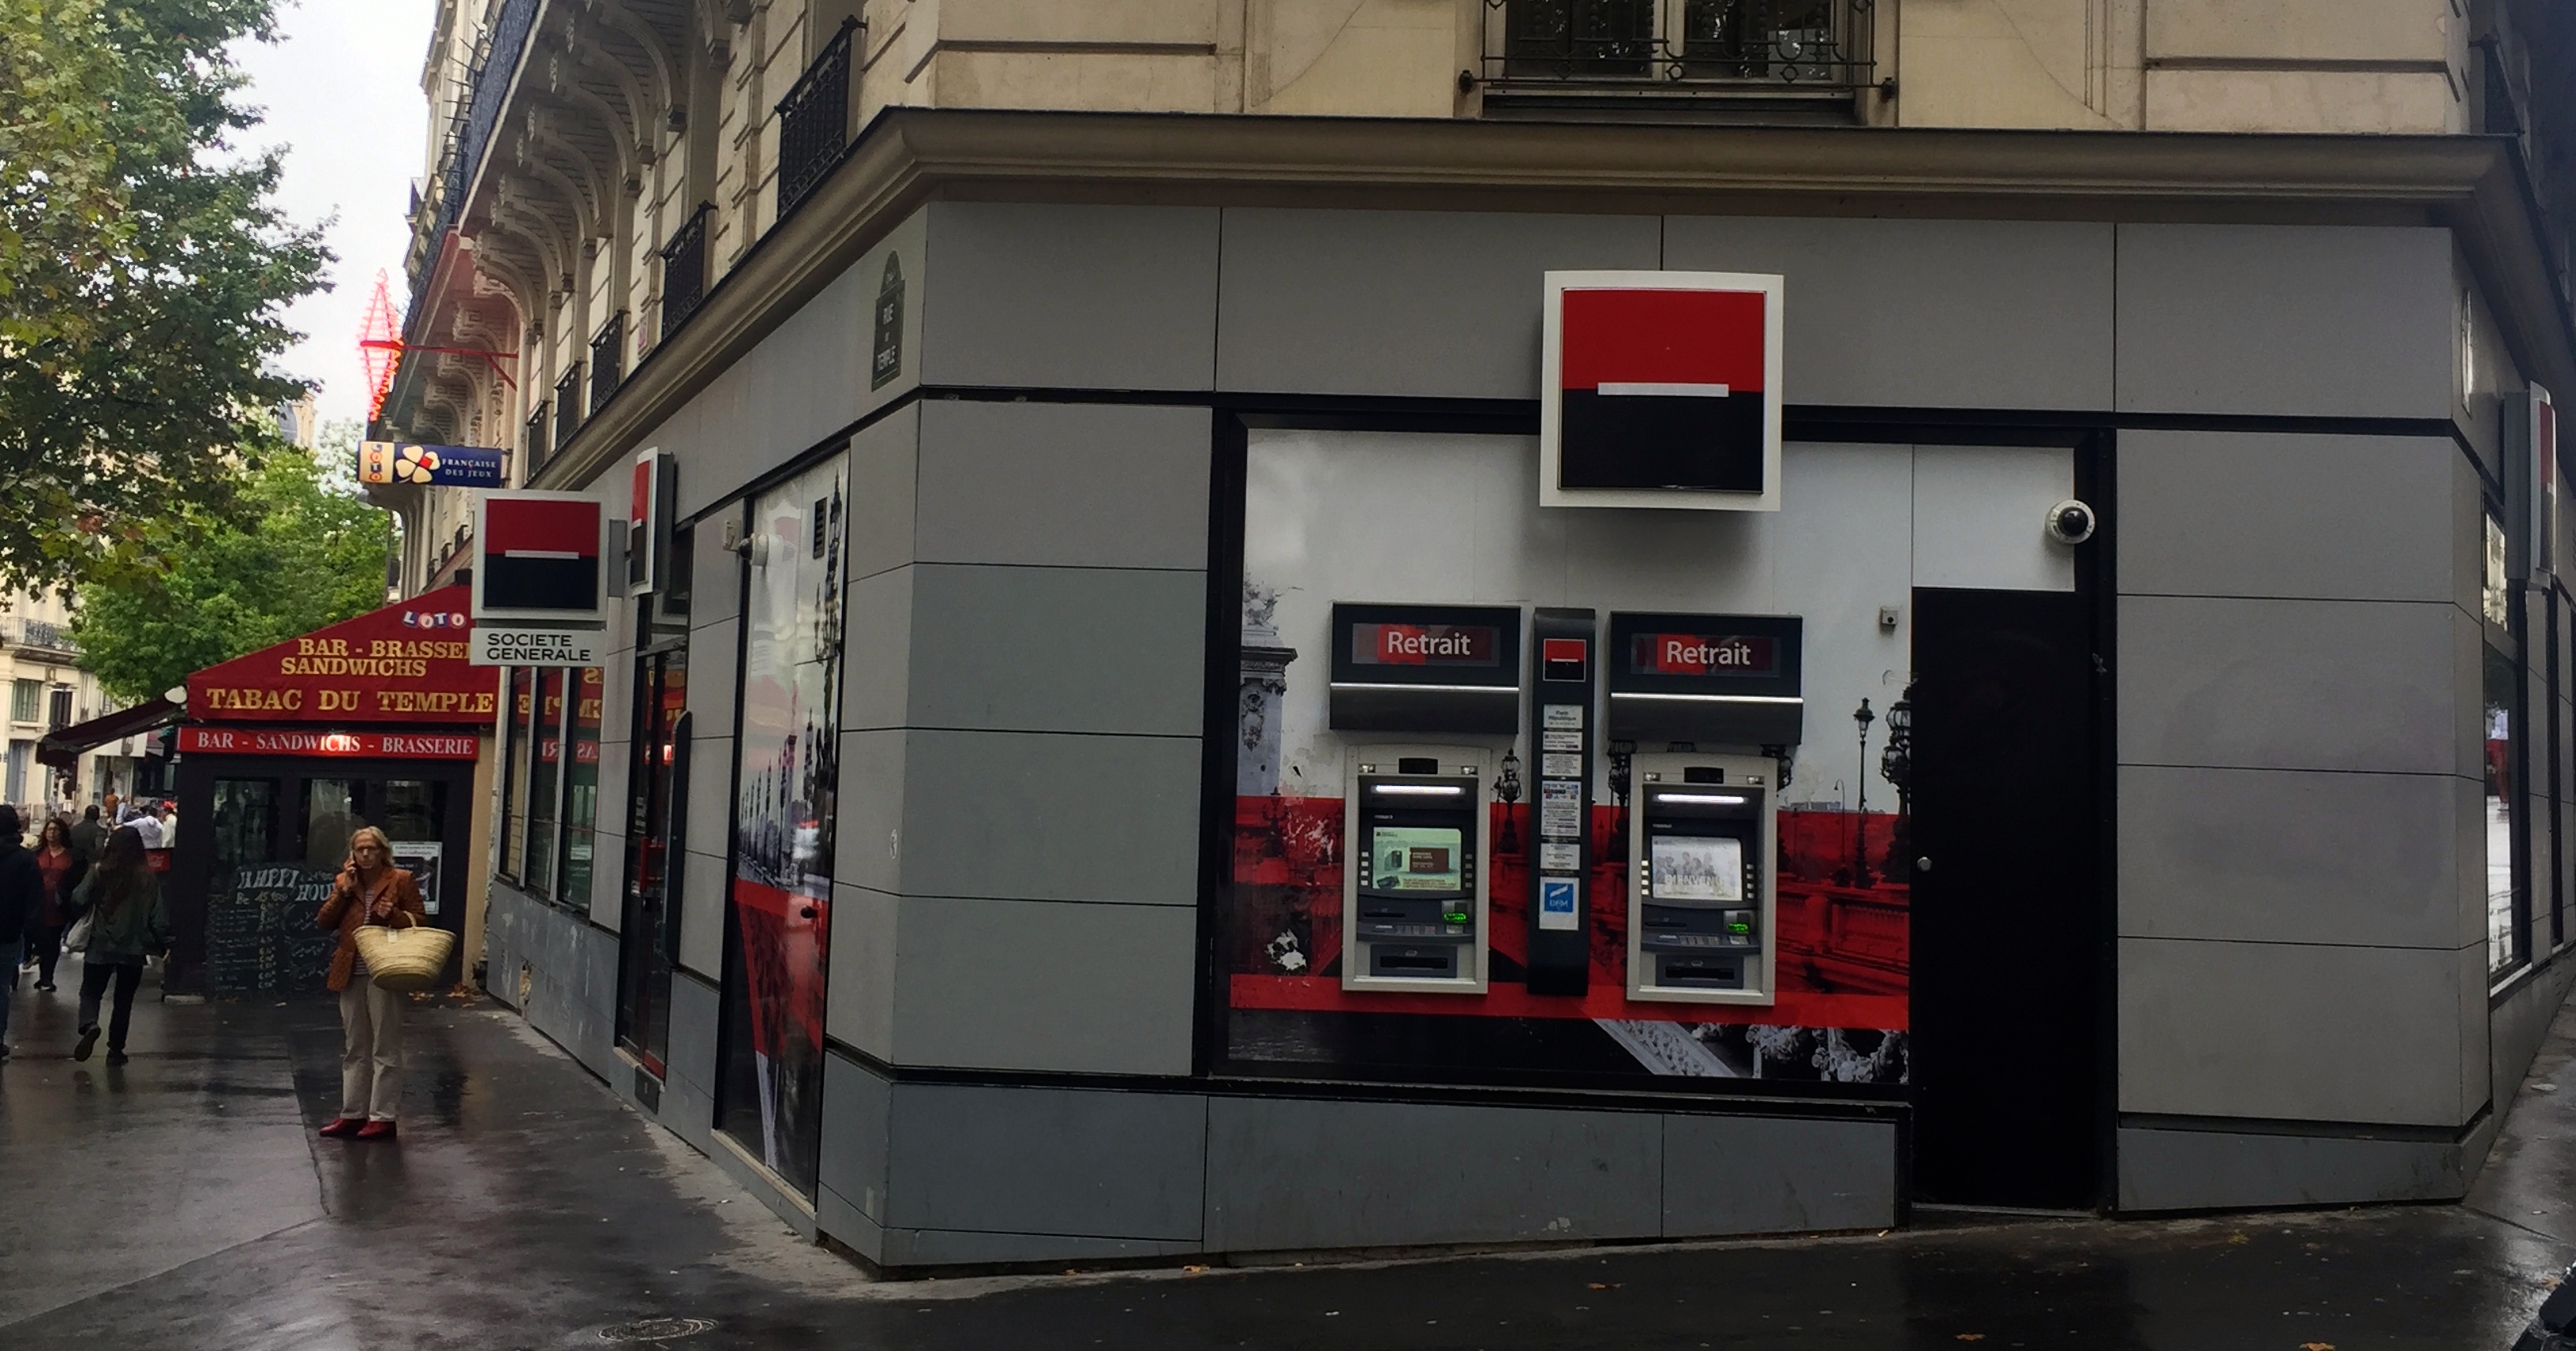 Opening a French bank account - VINGT Paris